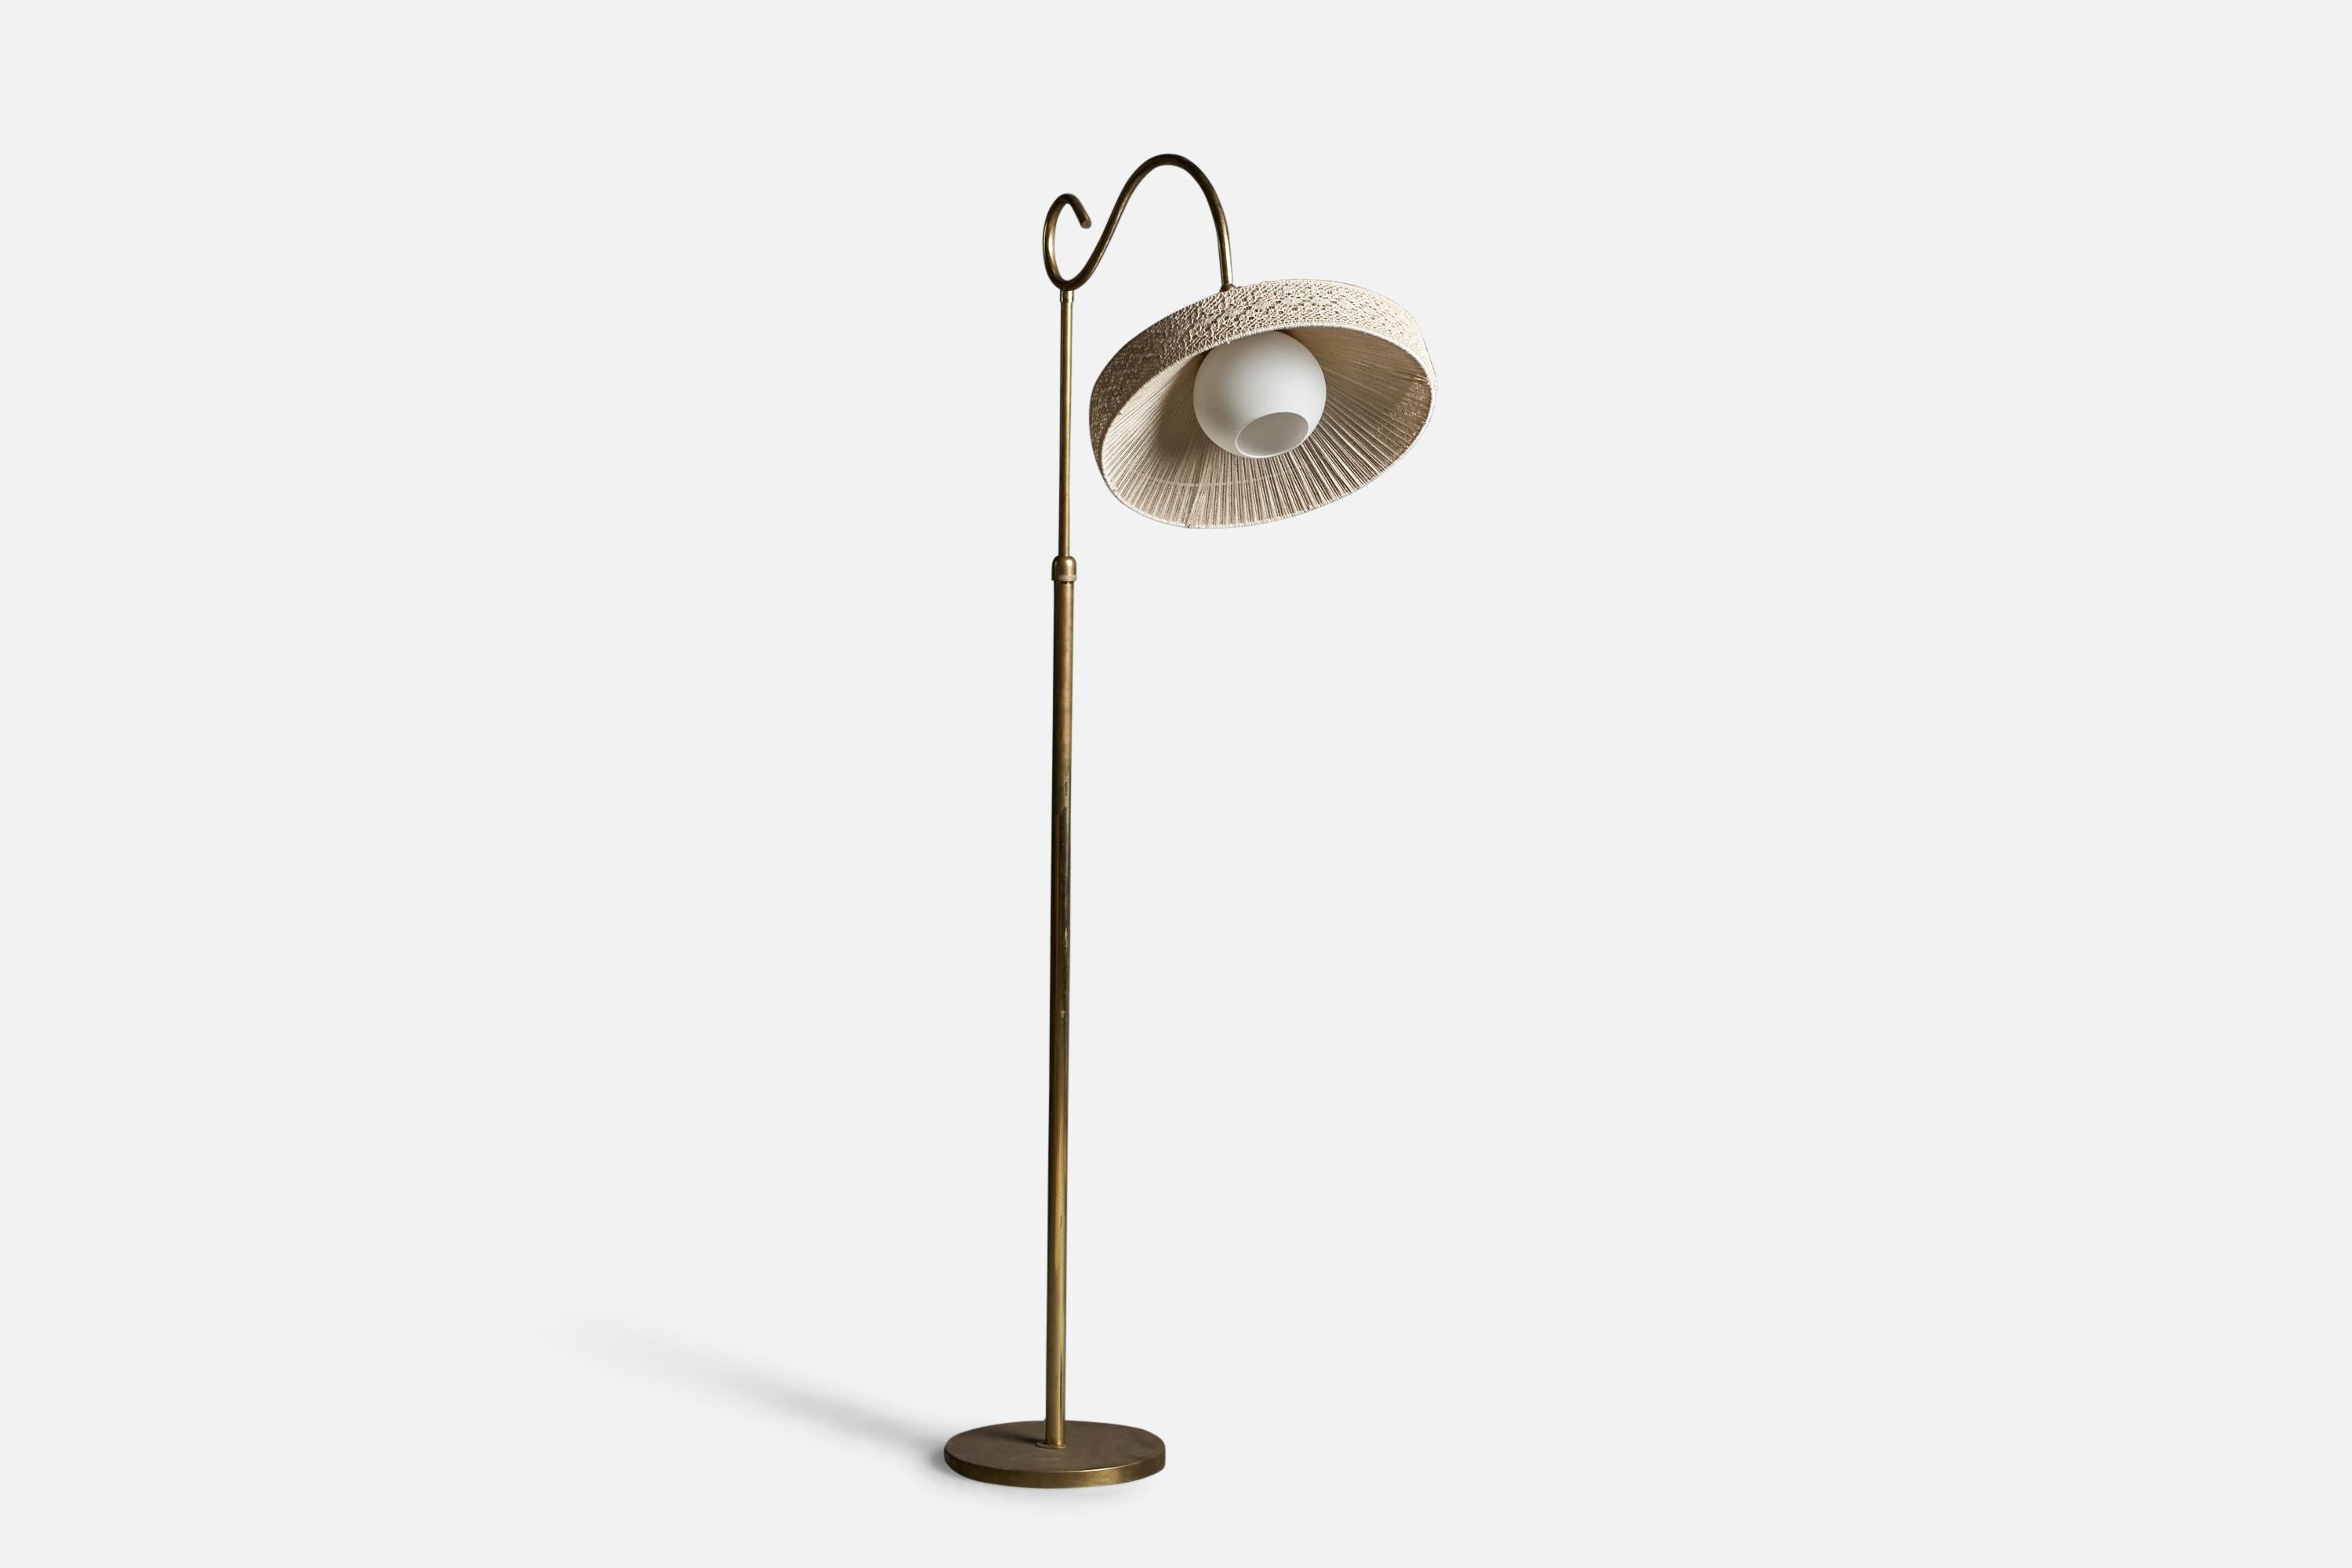 An adjustable brass, Glass and fabric floor lamp designed and produced in Italy, 1940s.

Overall Dimensions: 59.15